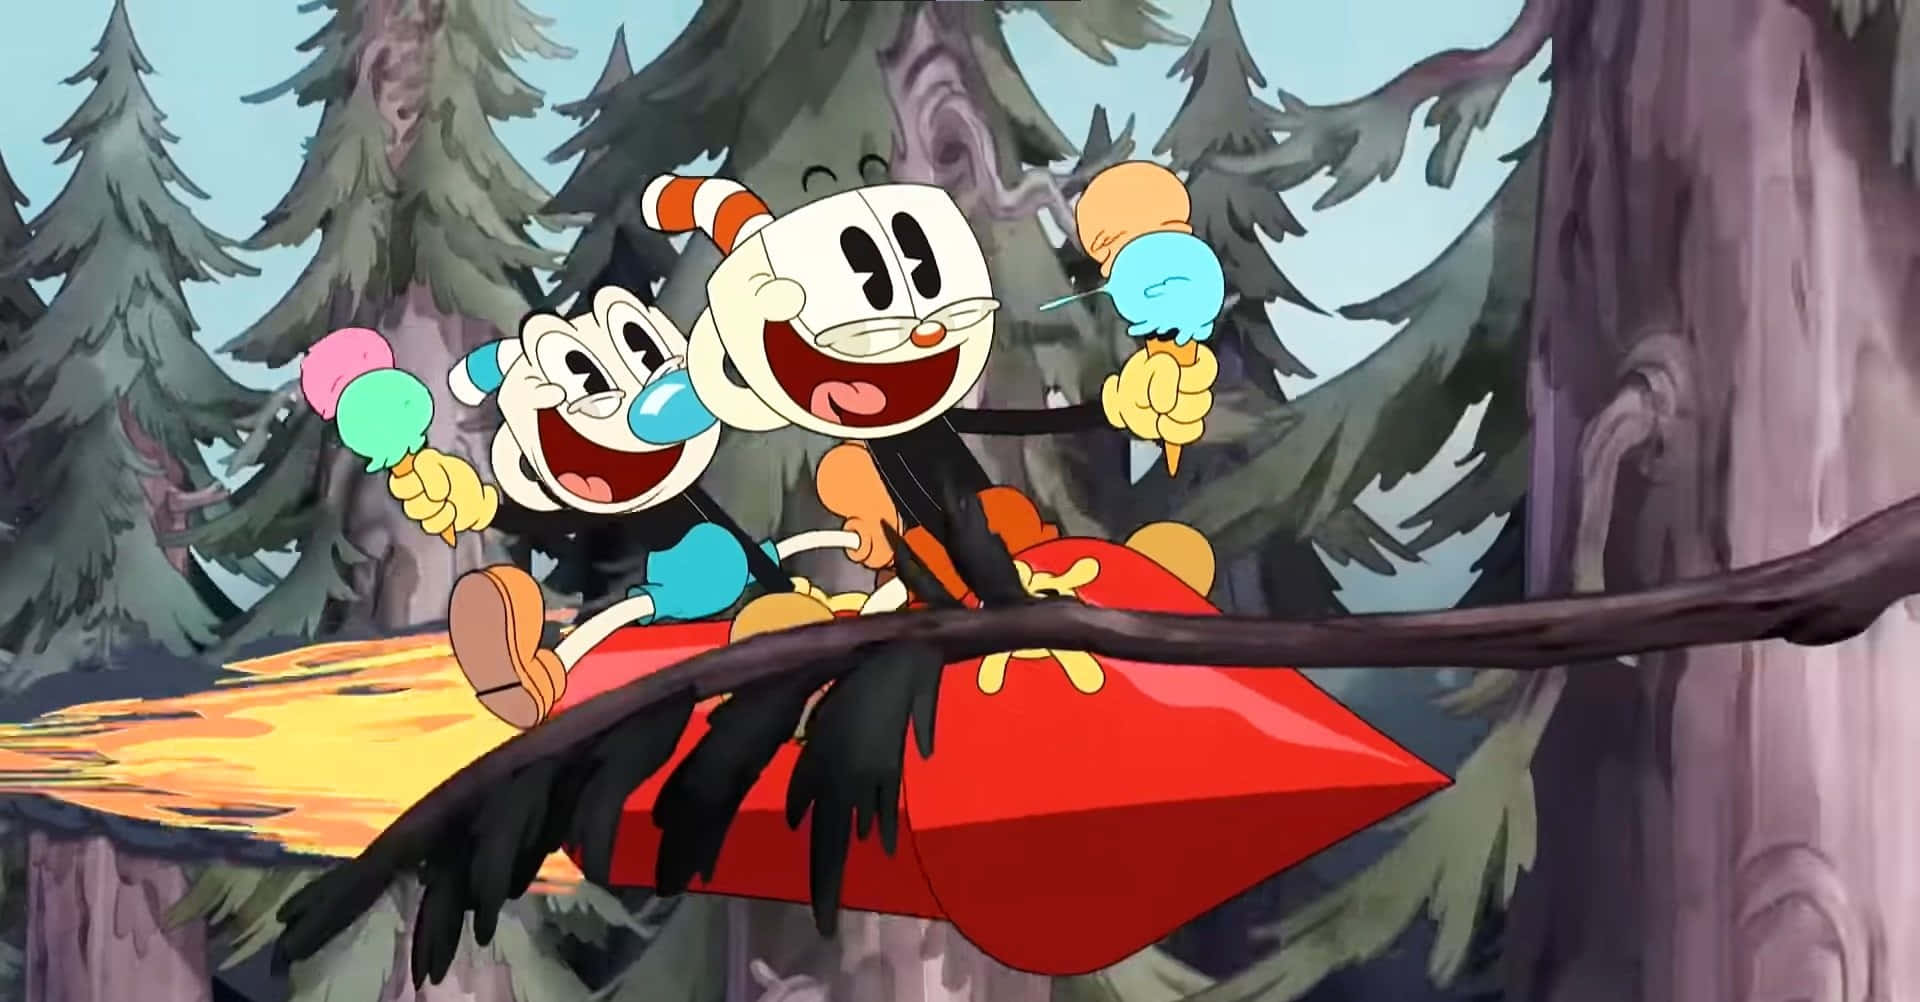 Cuphead and Mugman explore Weirdly Hollow